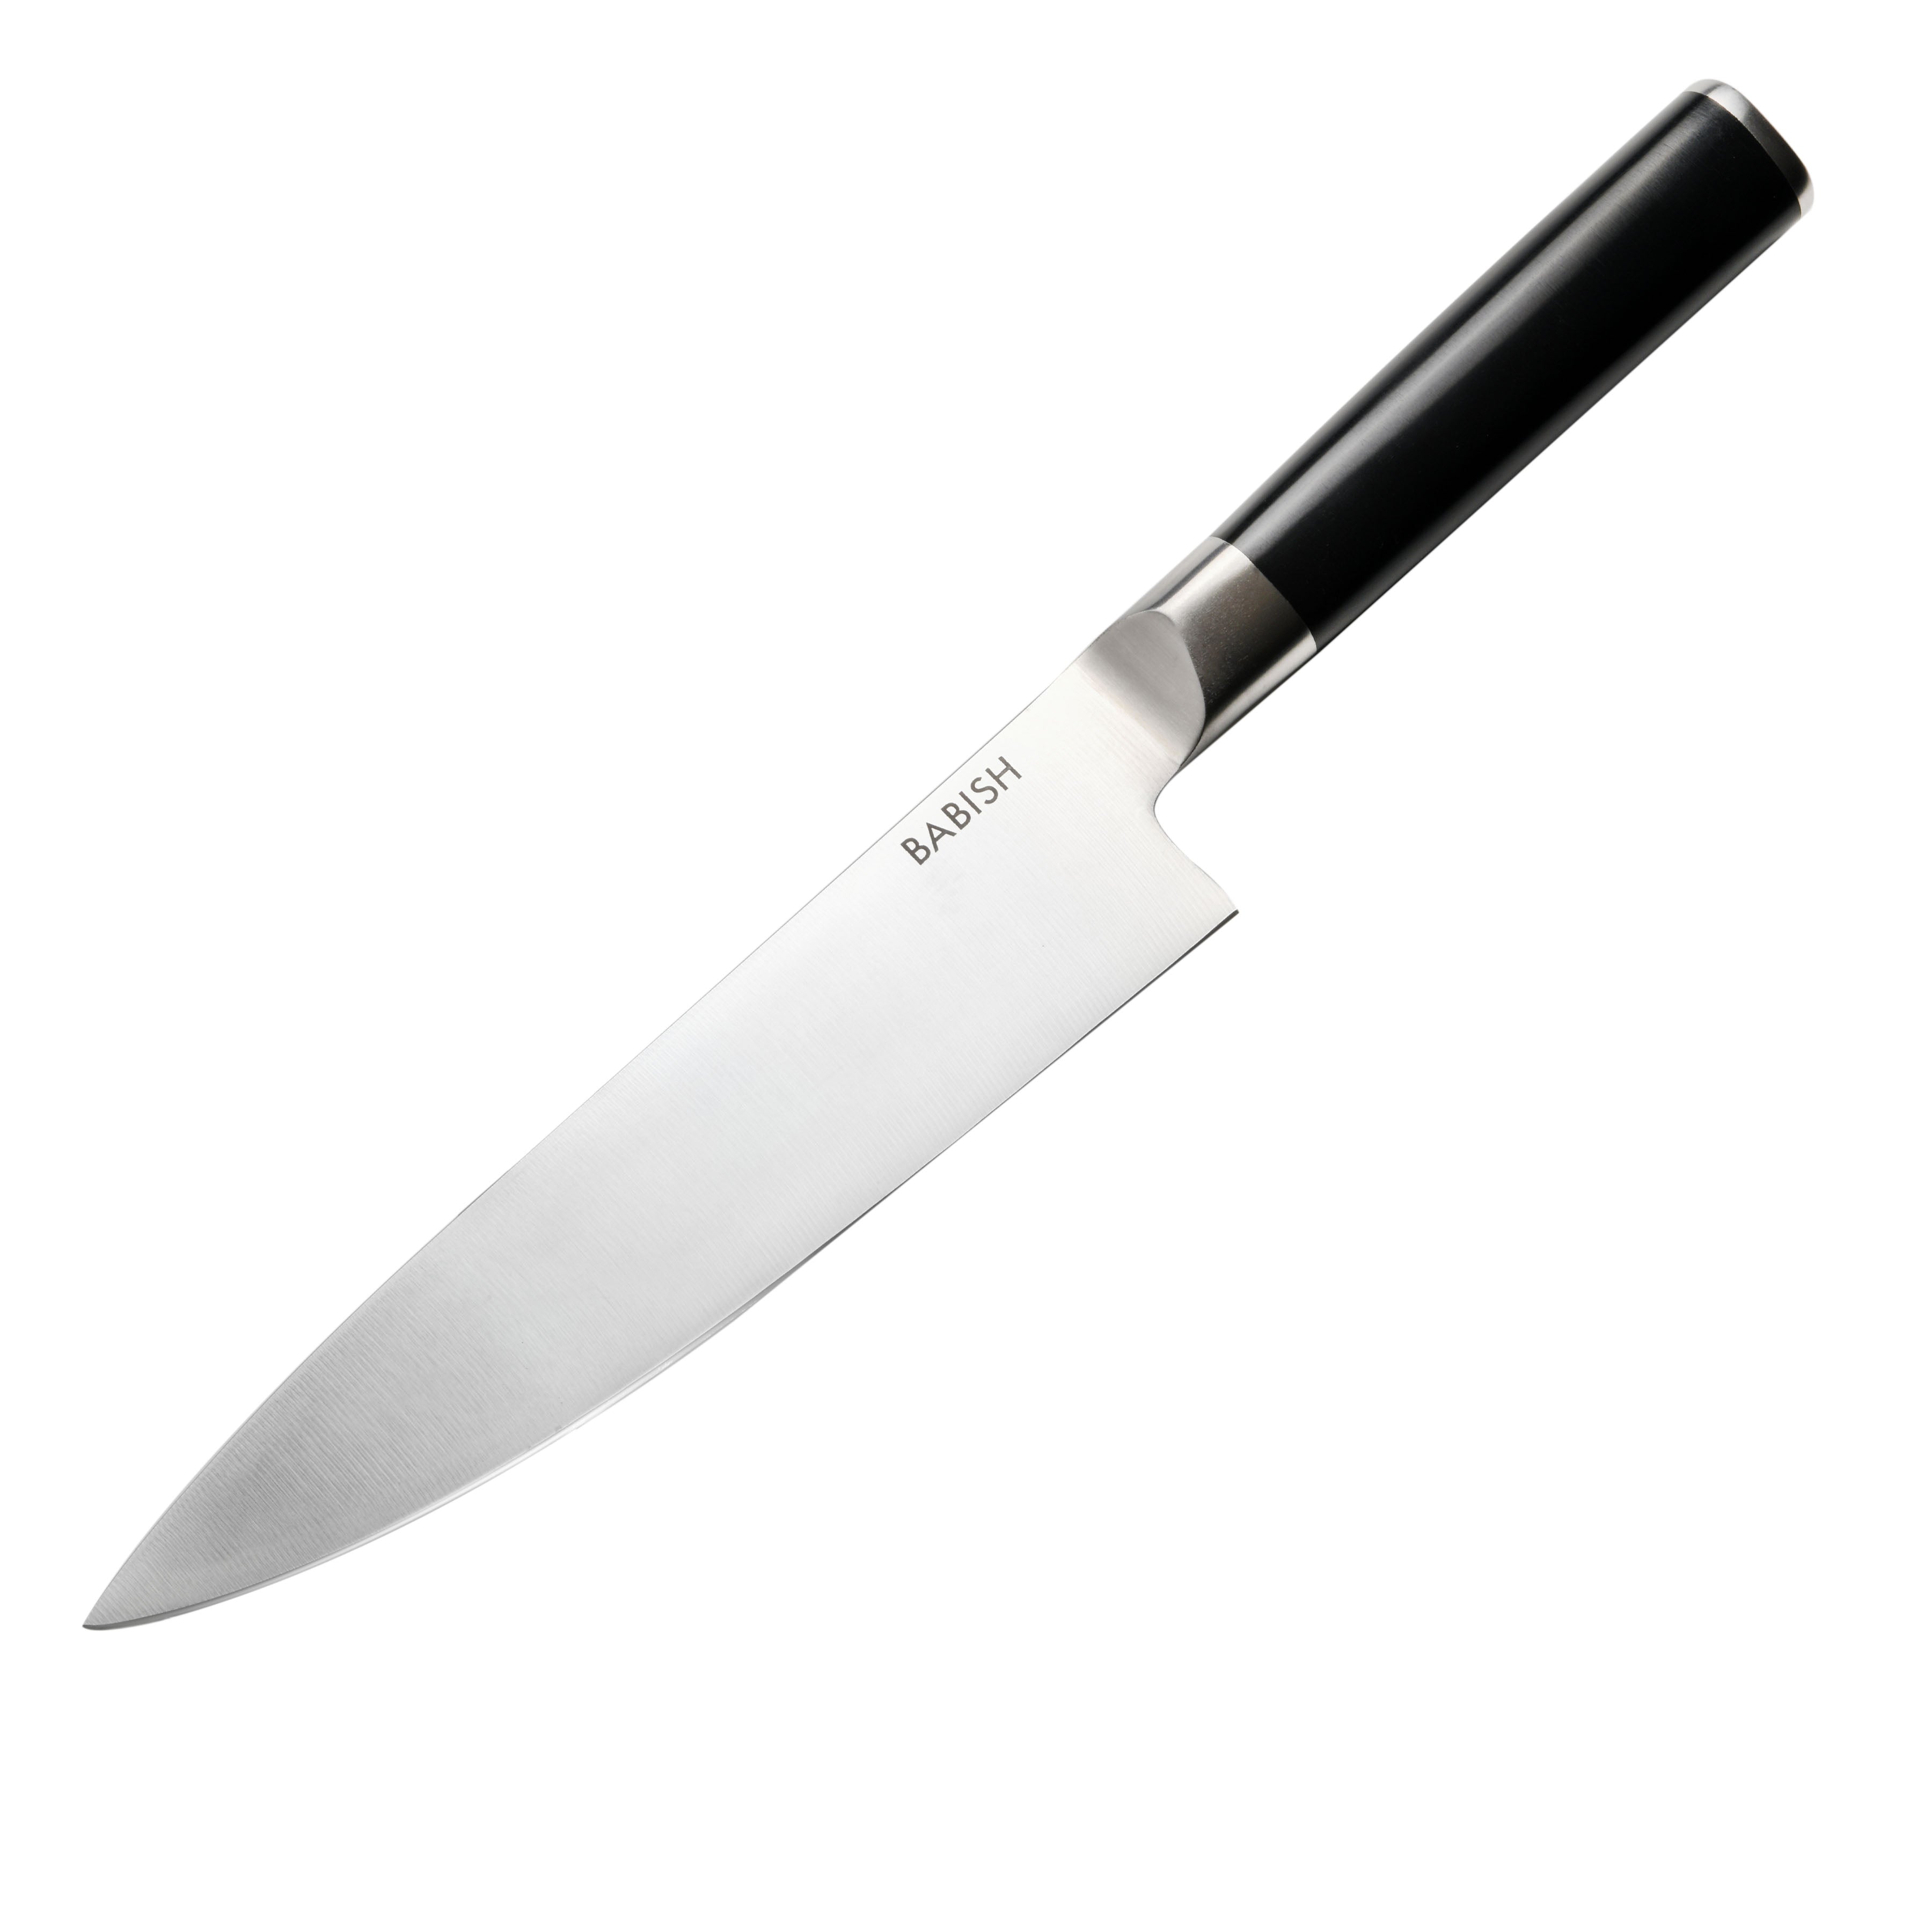 AVACRAFT Kitchen Utility Knife, High Carbon German 1.4116 Stainless St